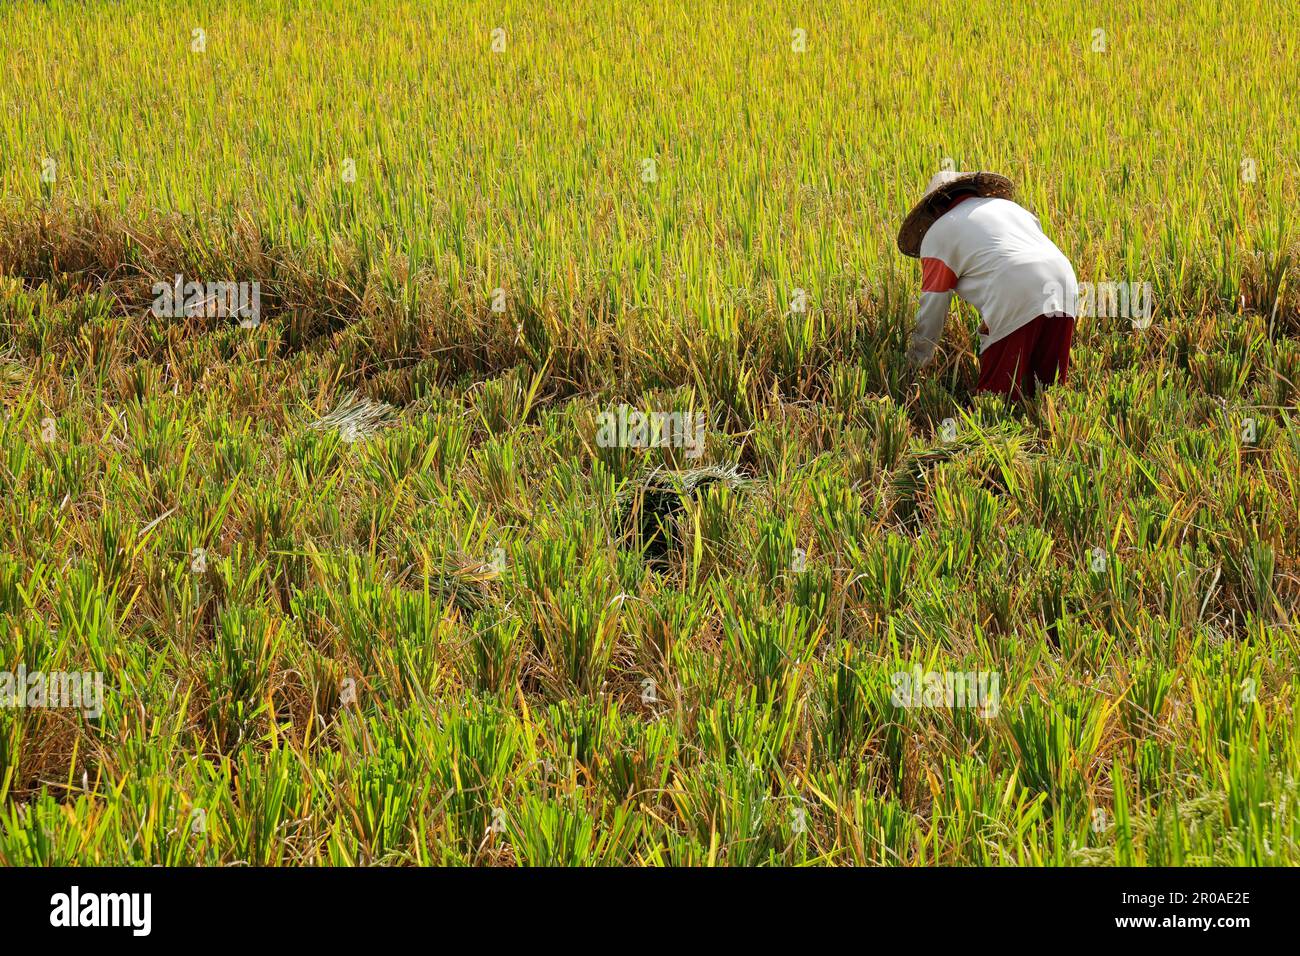 Ubud, Bali, Indonesia - September 6, 2019: A woman working in a rural rice paddy - rice holds the central place in Indonesian culture and cuisine Stock Photo